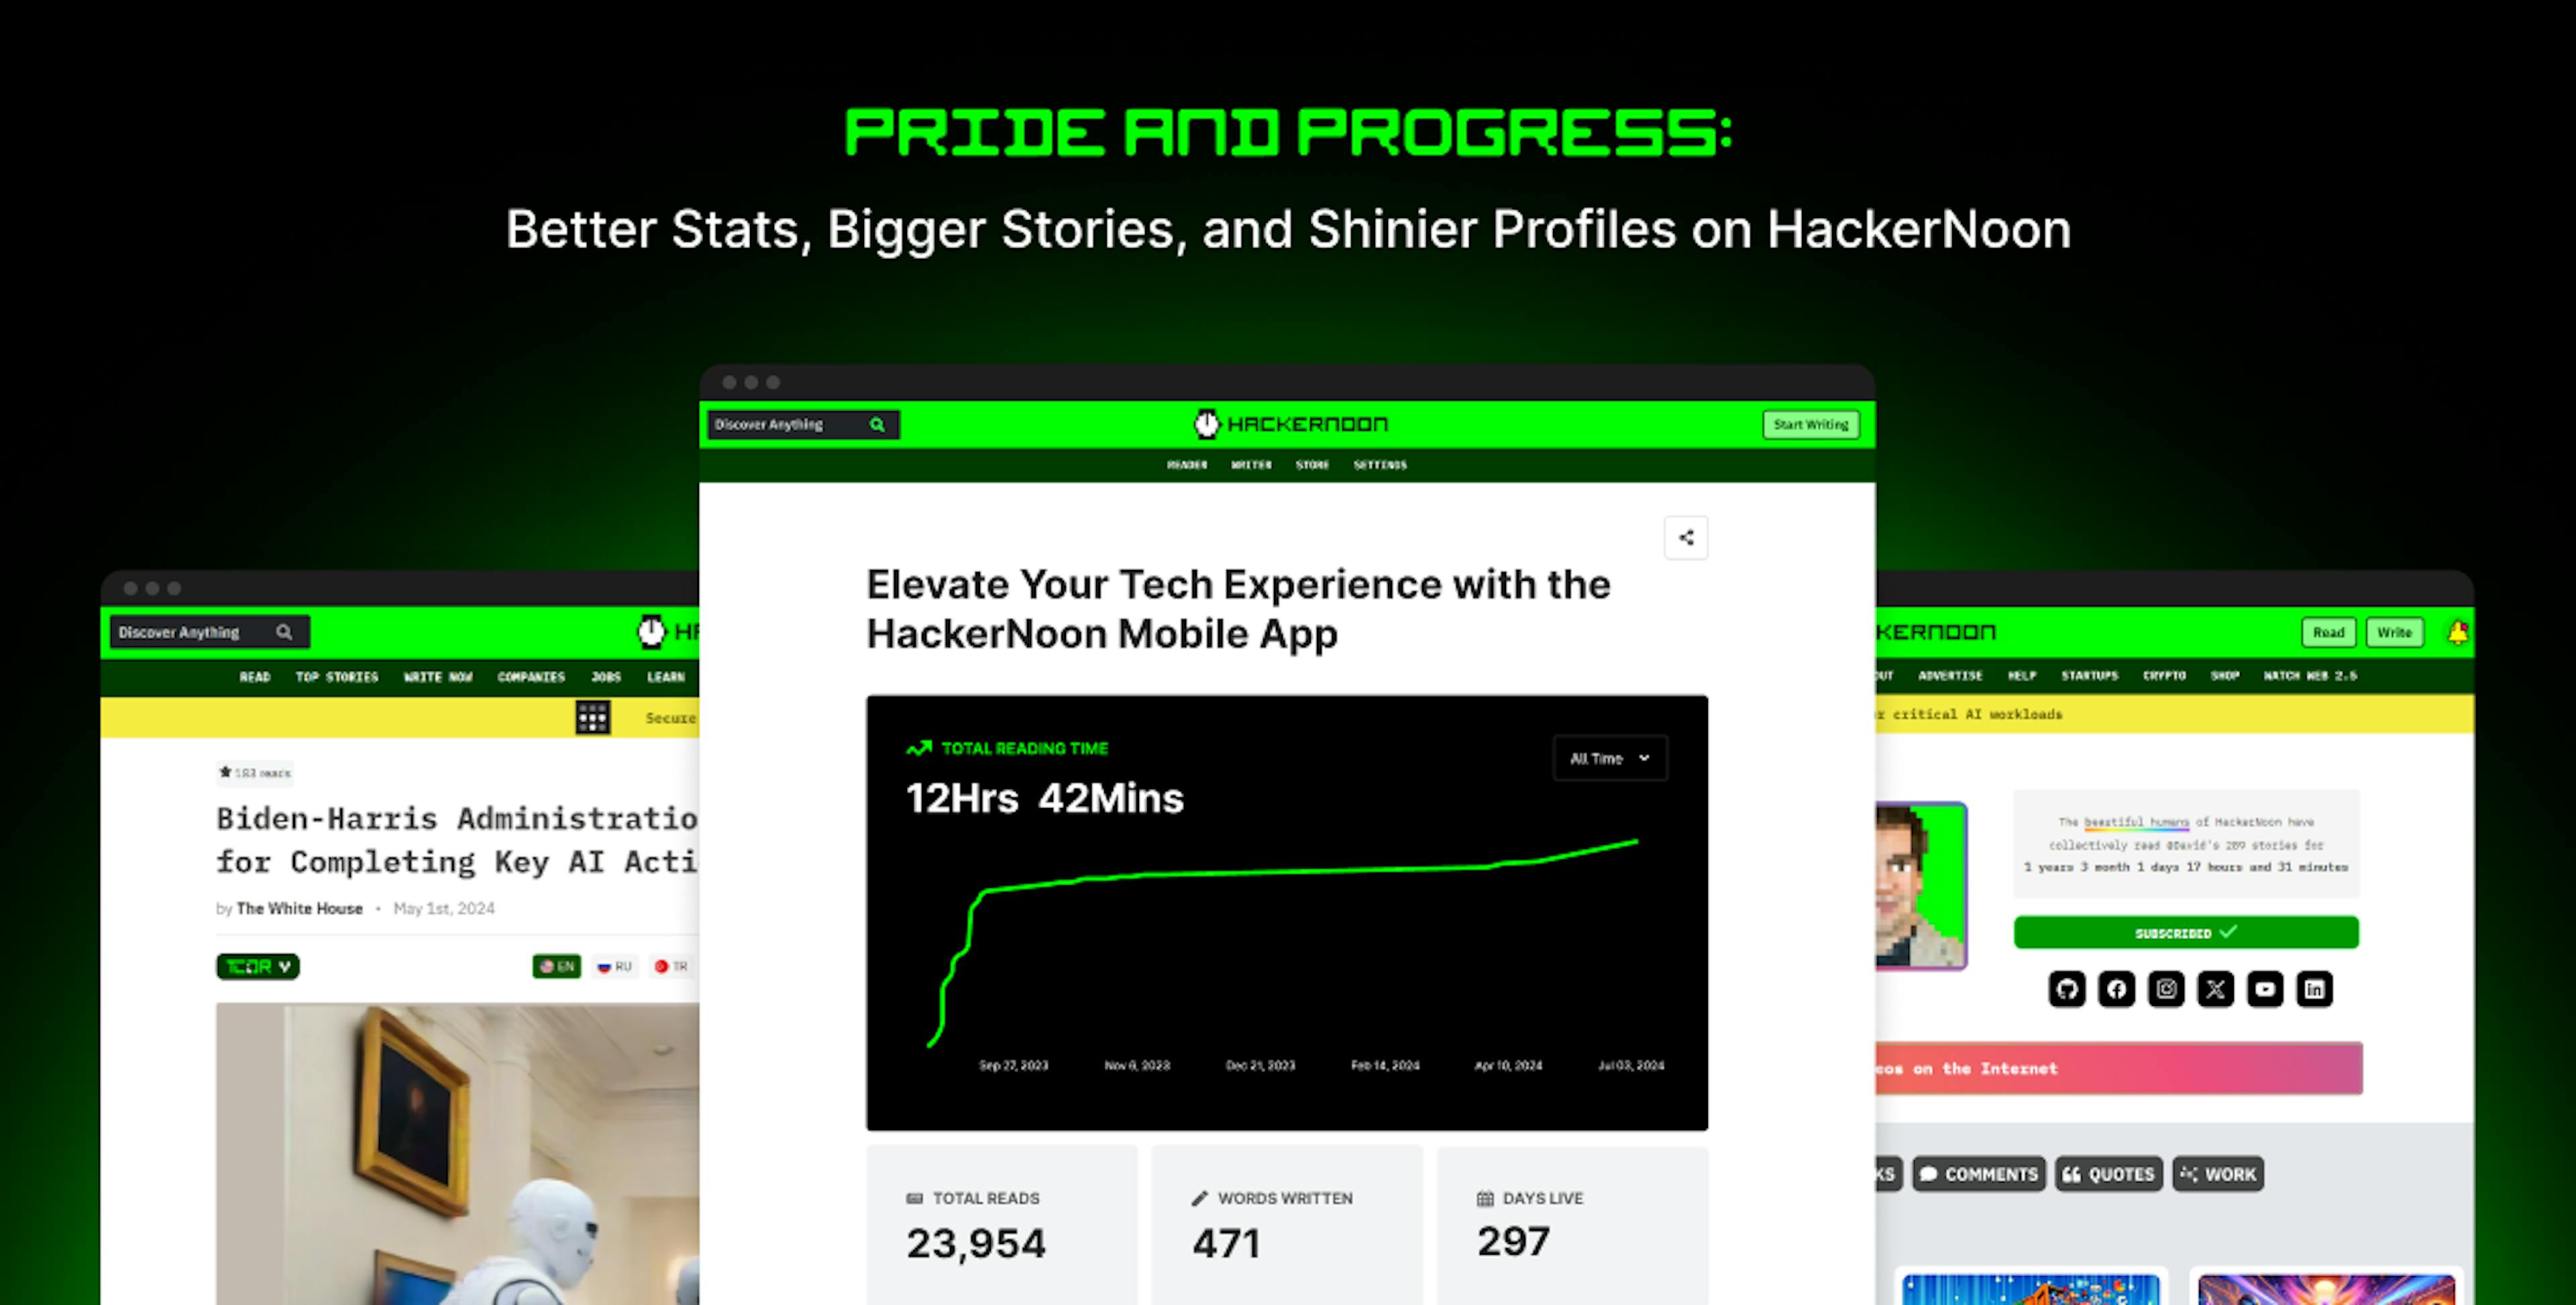 featured image - Pride and Progress: Enhanced Stats, Improved Story Navigation, and Shinier Profiles on HackerNoon